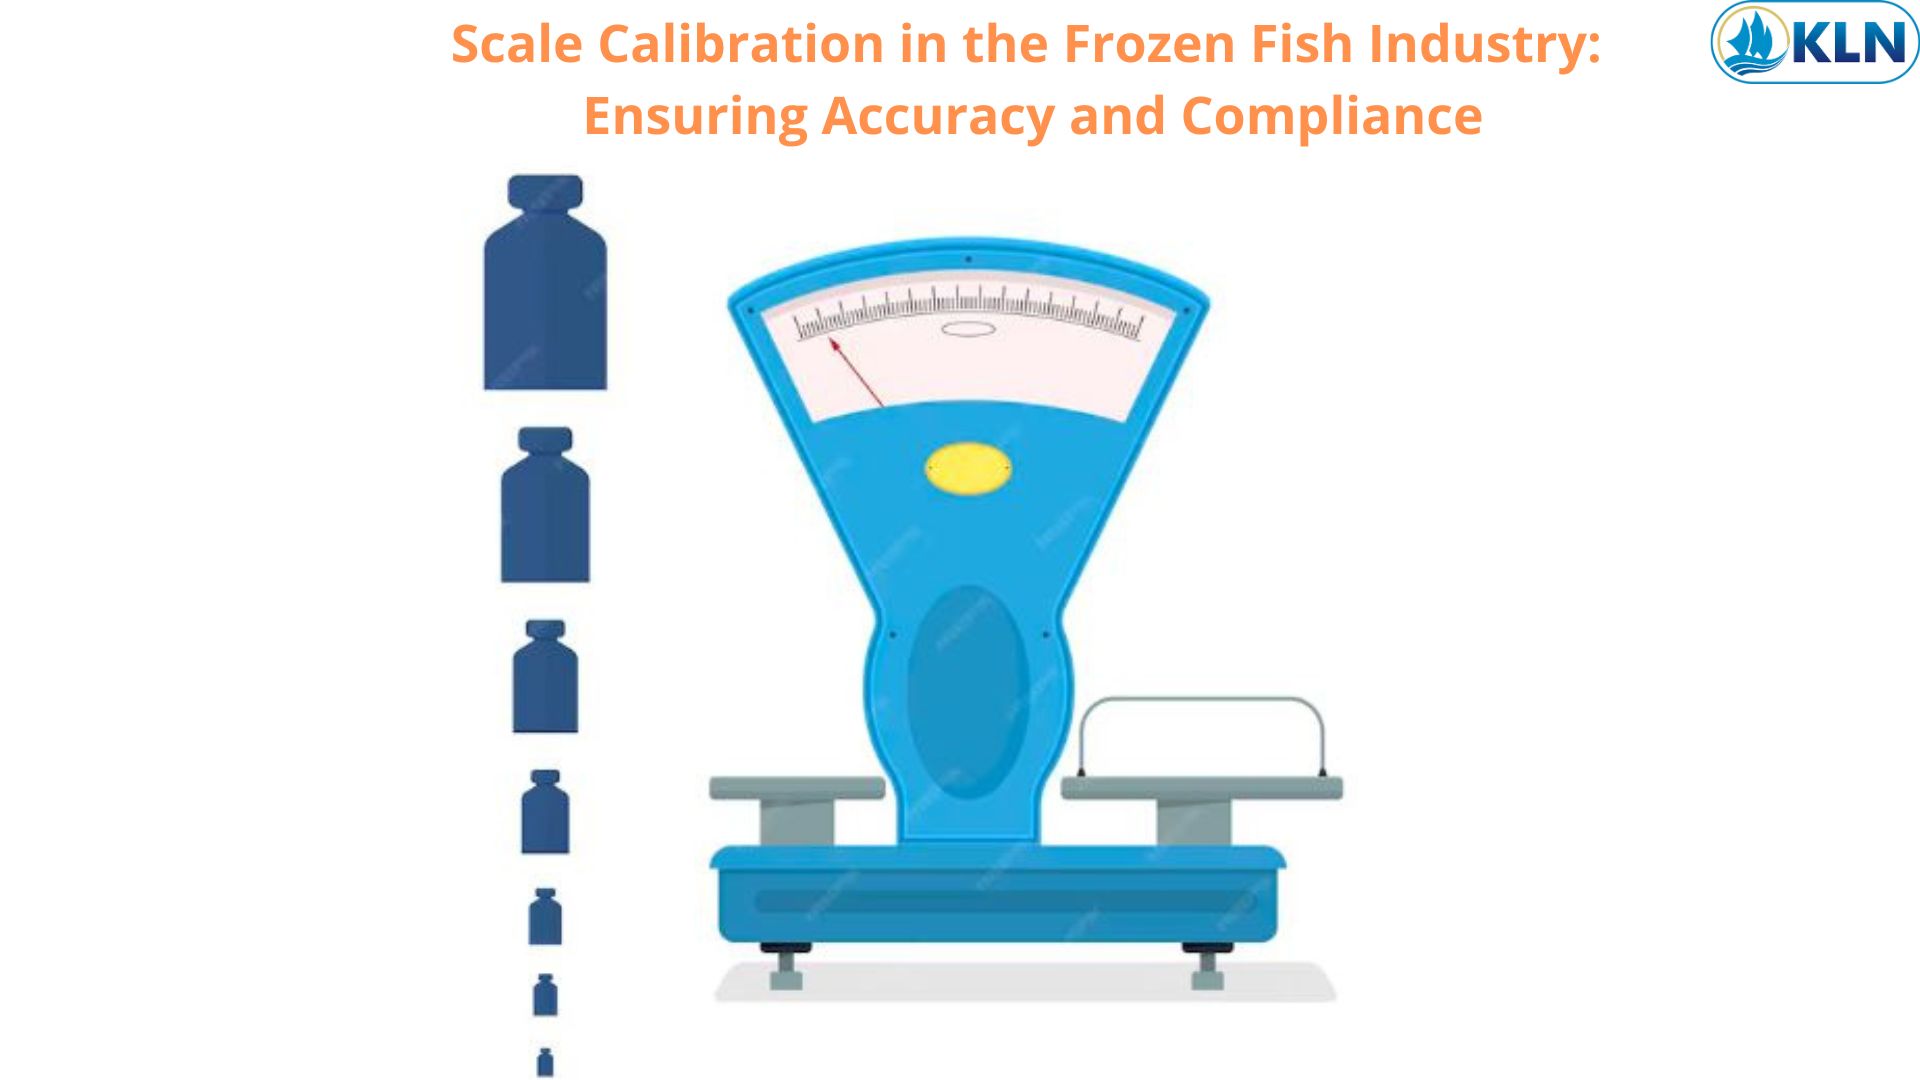 Scale Calibration in the Frozen Fish Industry: Ensuring Accuracy and Compliance